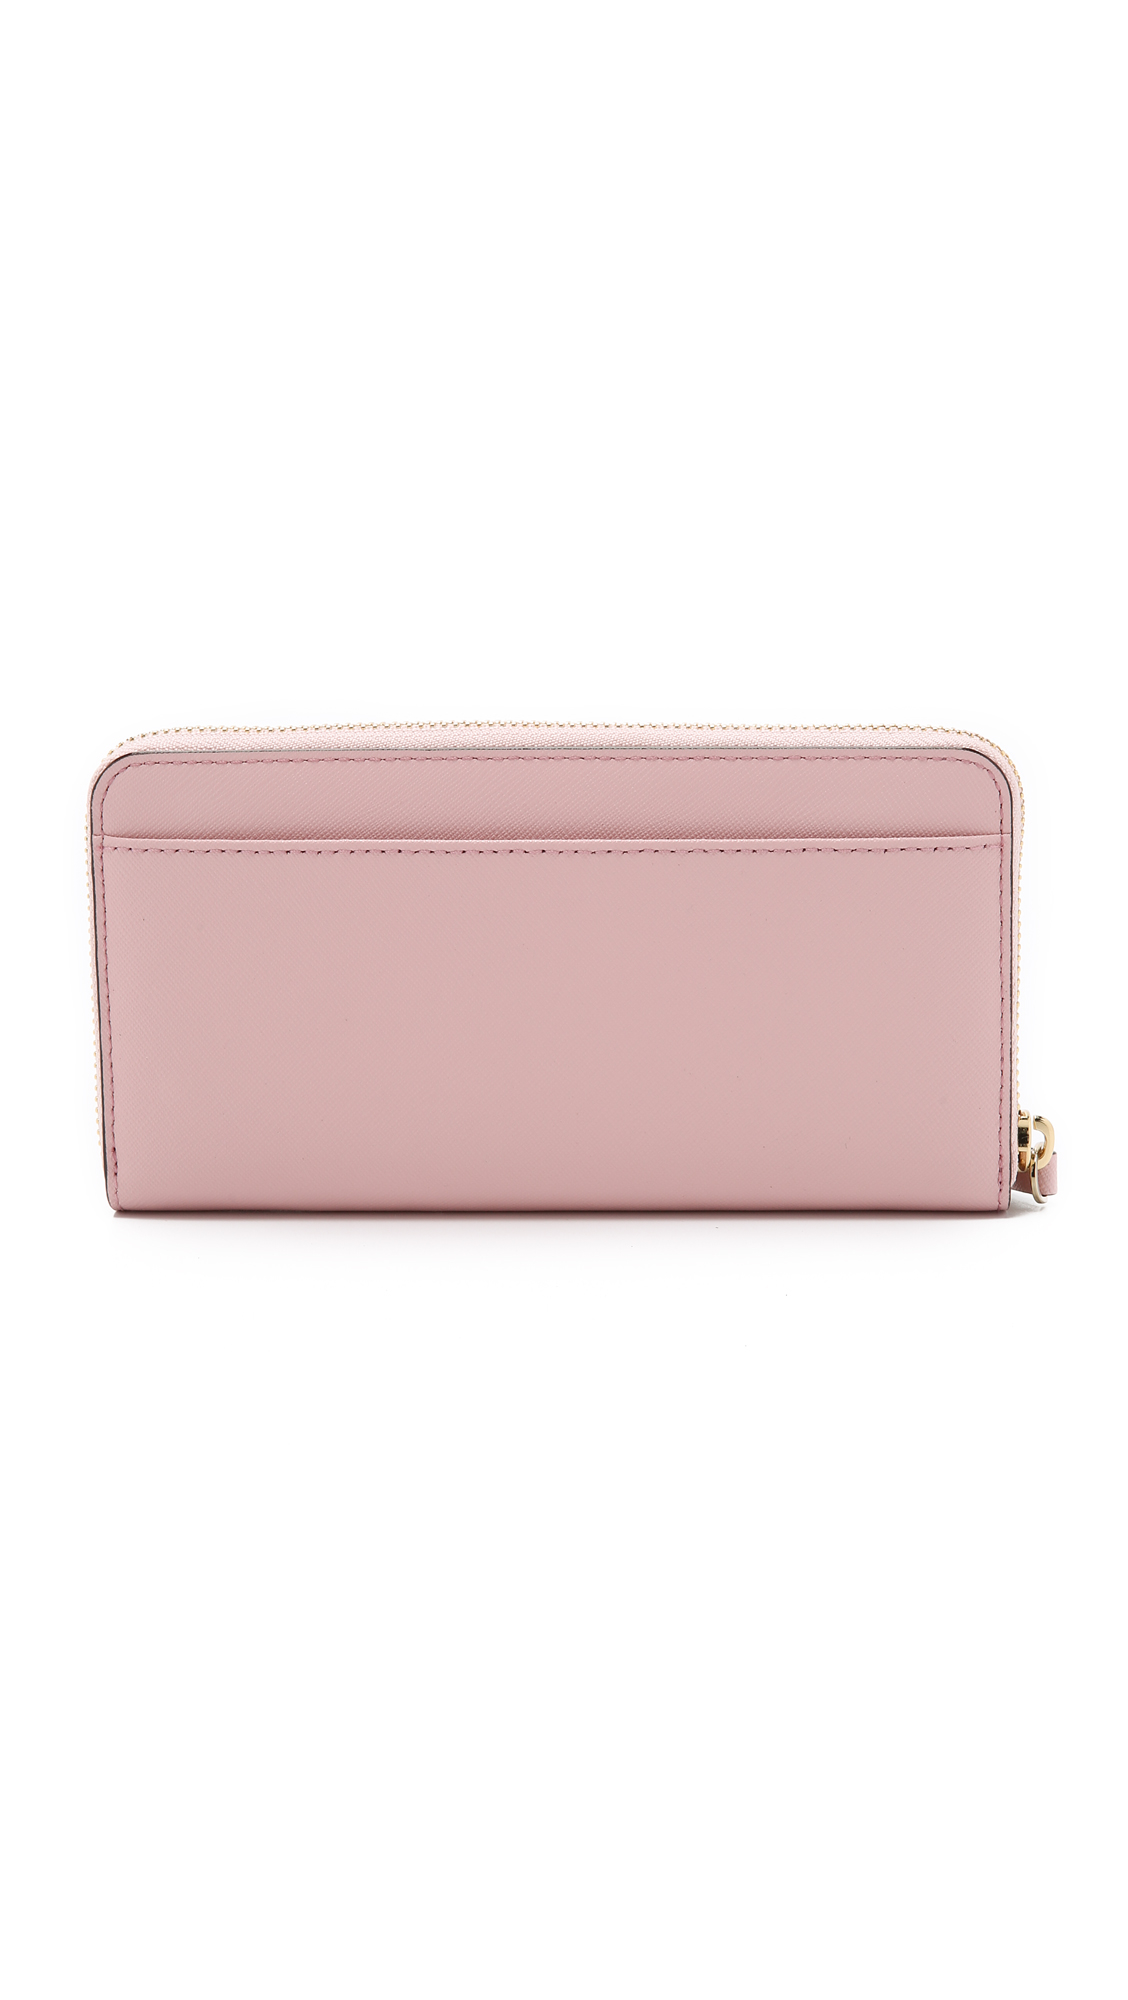 Kate Spade Lacey Zip Around Continental Wallet - Rose Jade in Pink - Lyst